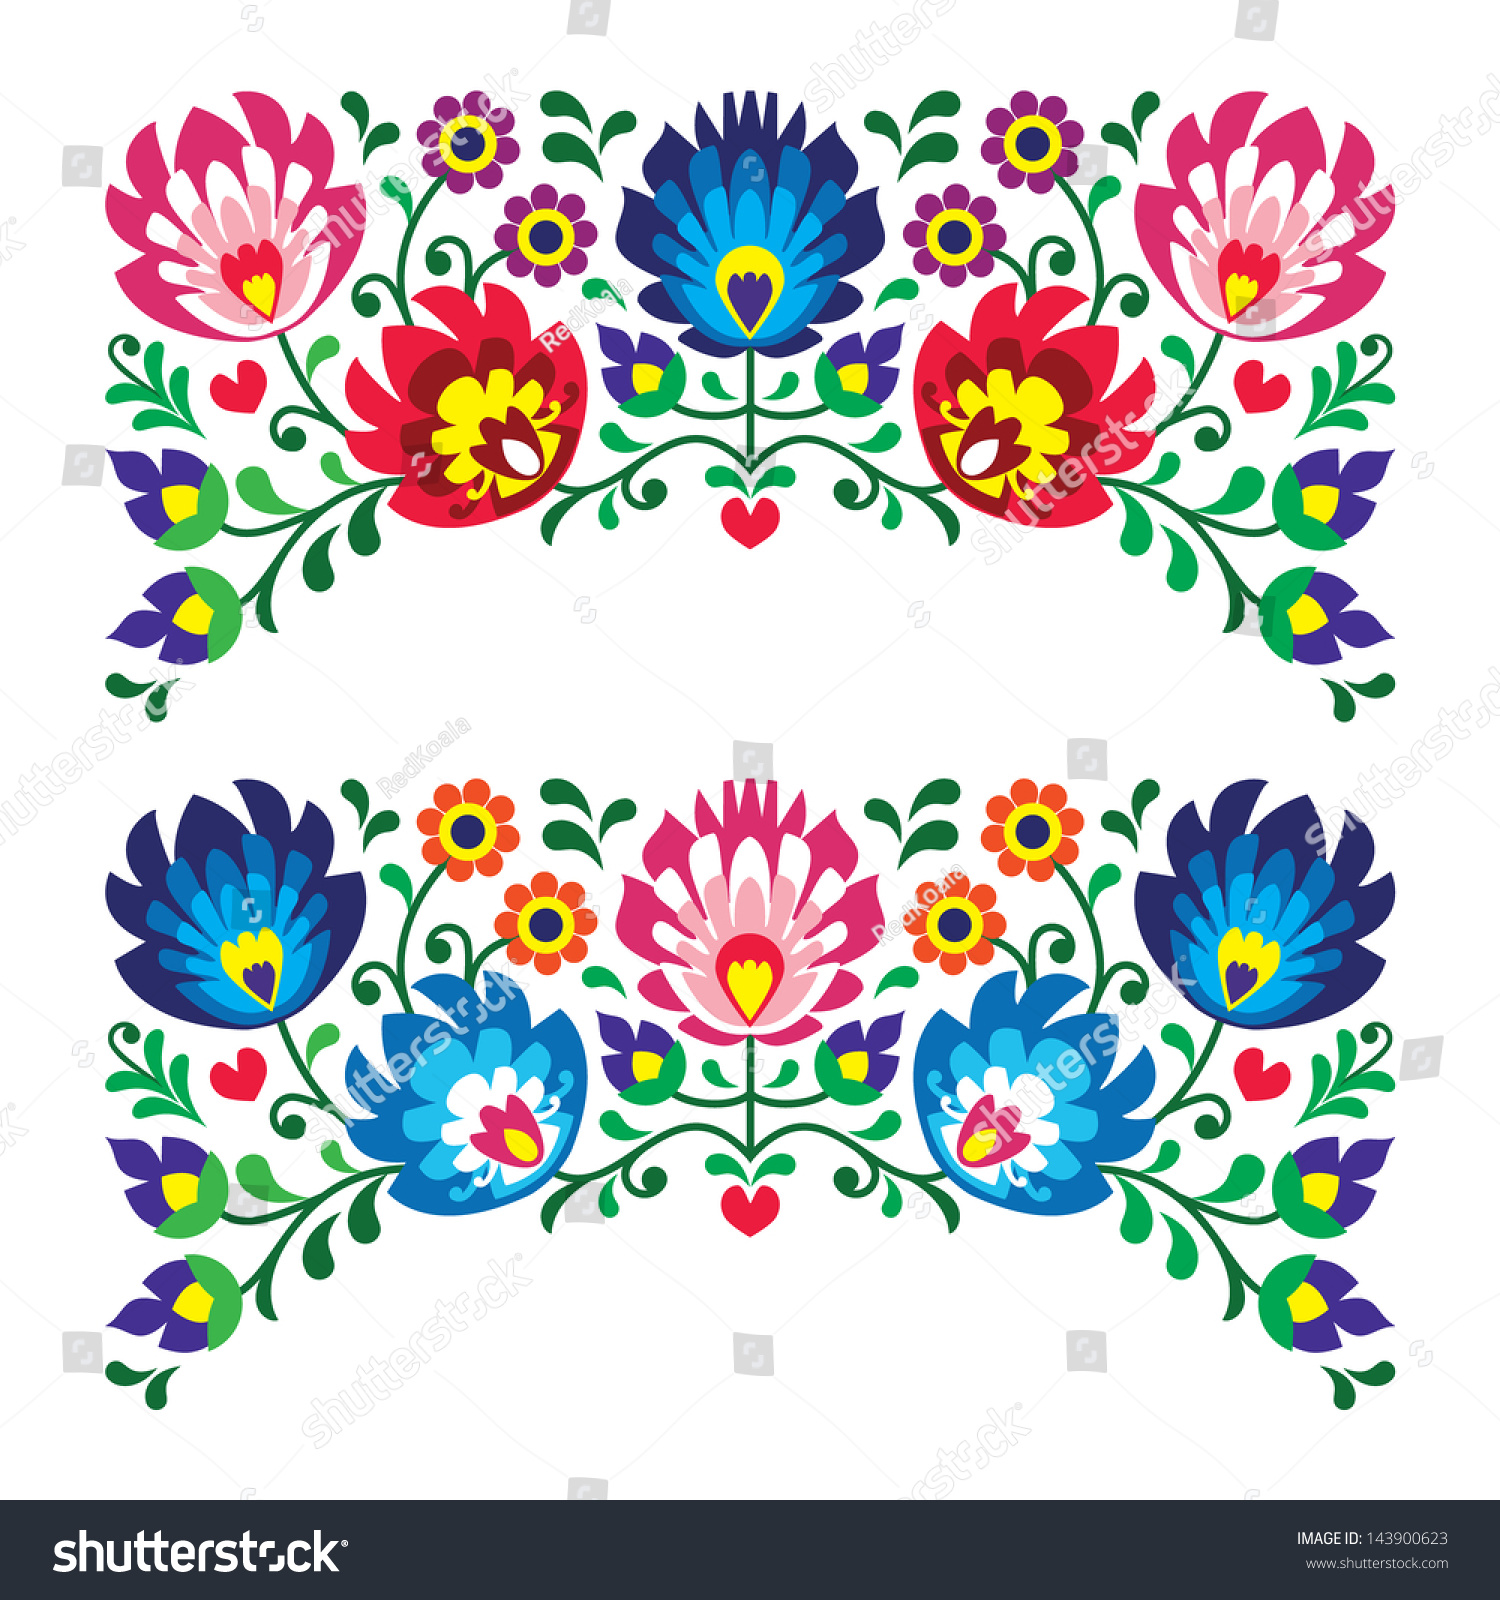 free vector embroidery clipart - photo #28